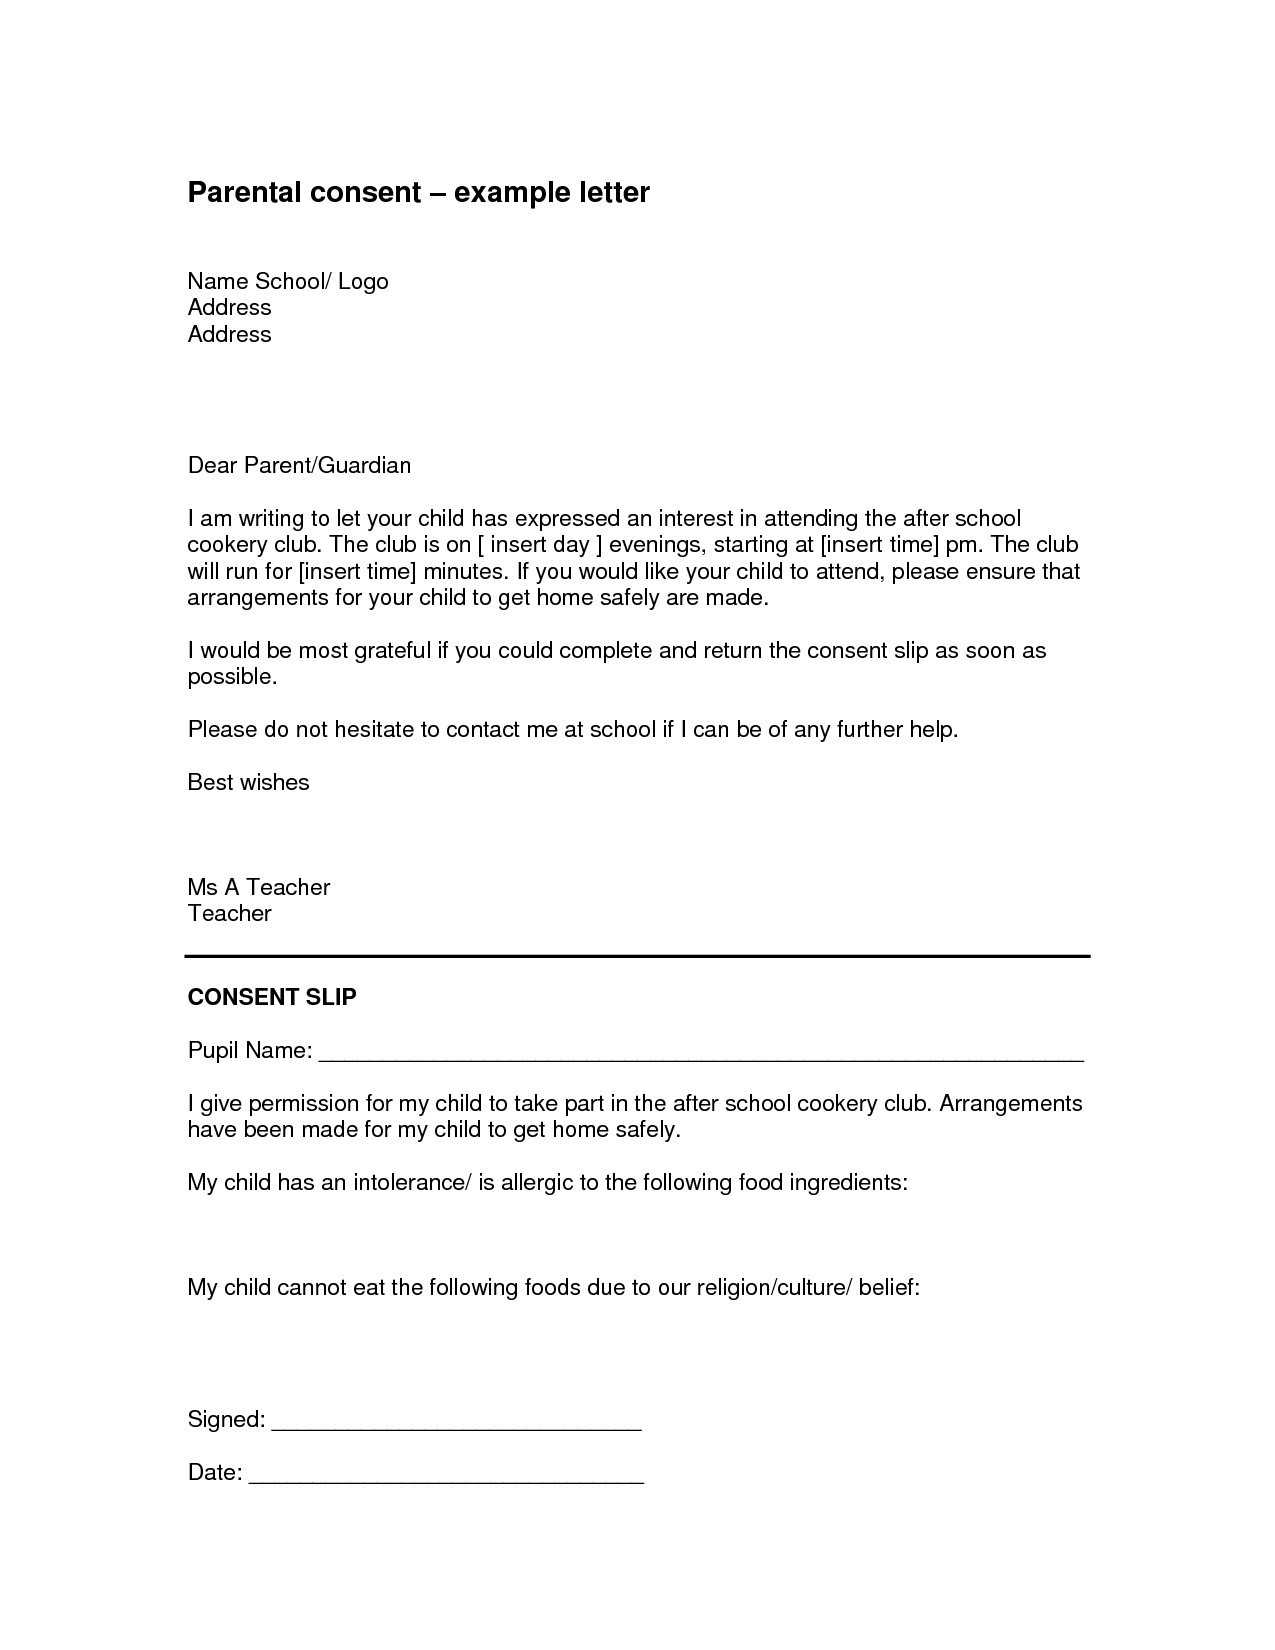 travel-consent-letter-template